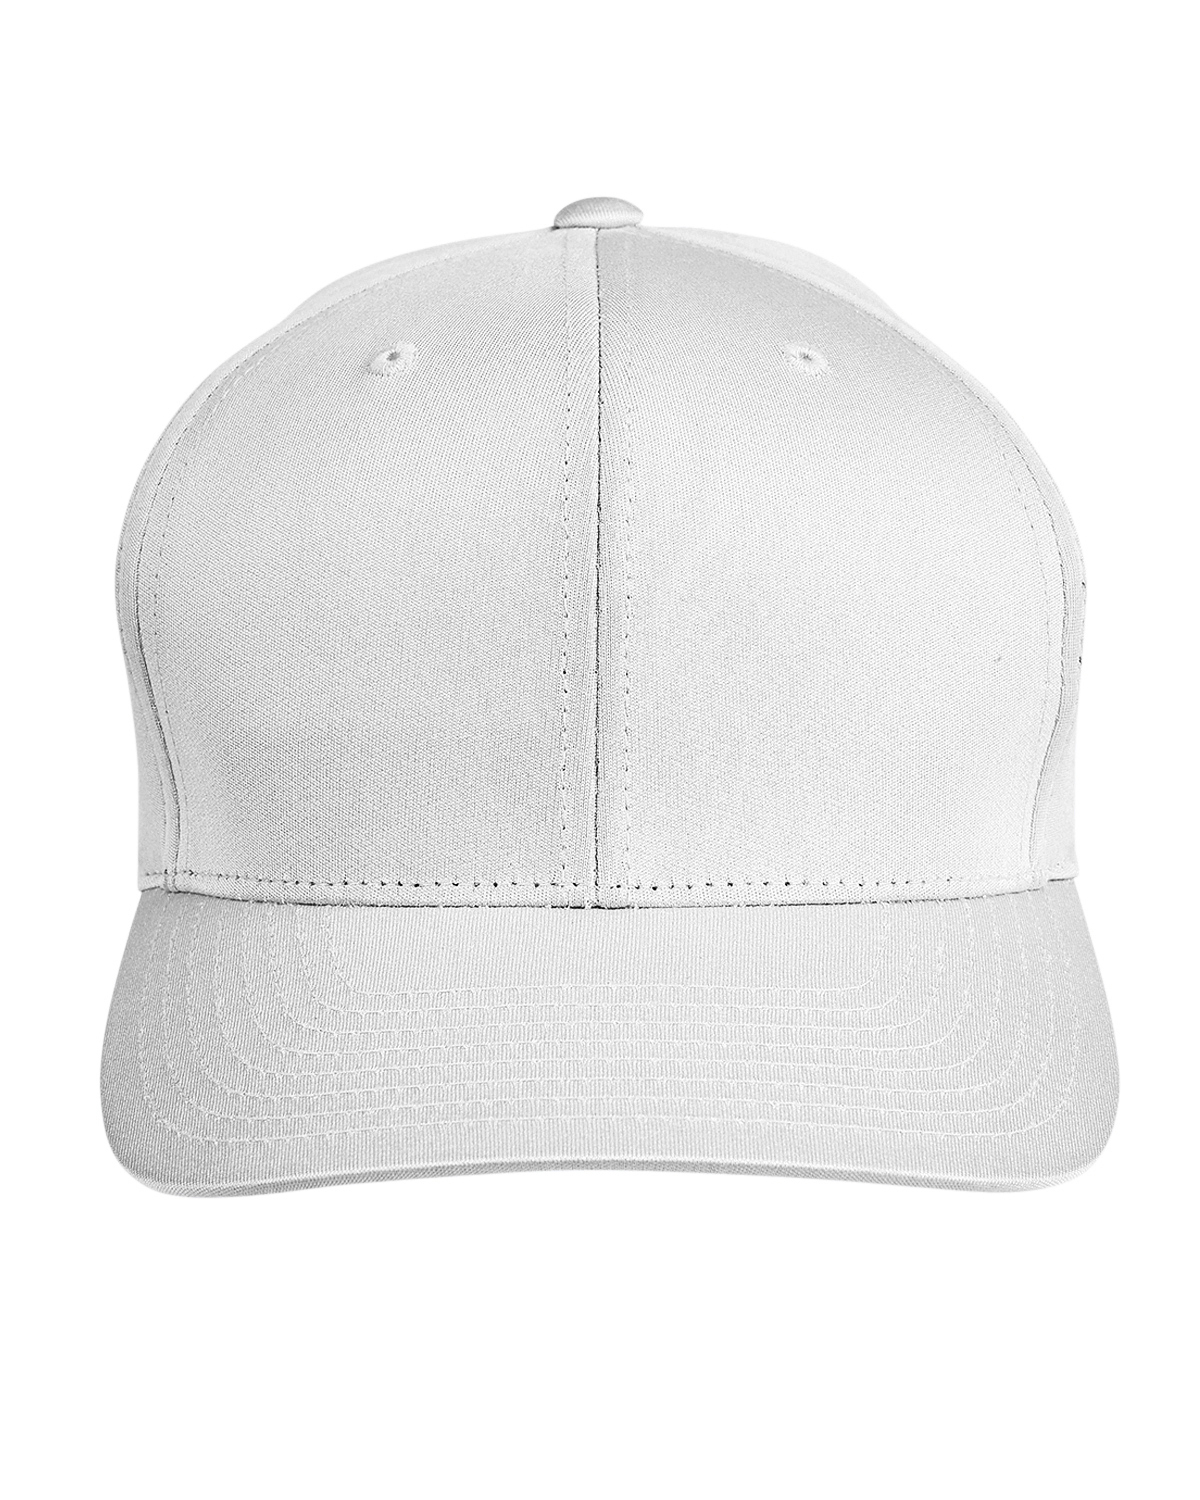 'Team 365 TT801Y by Yupoong Youth Zone Performance Cap'